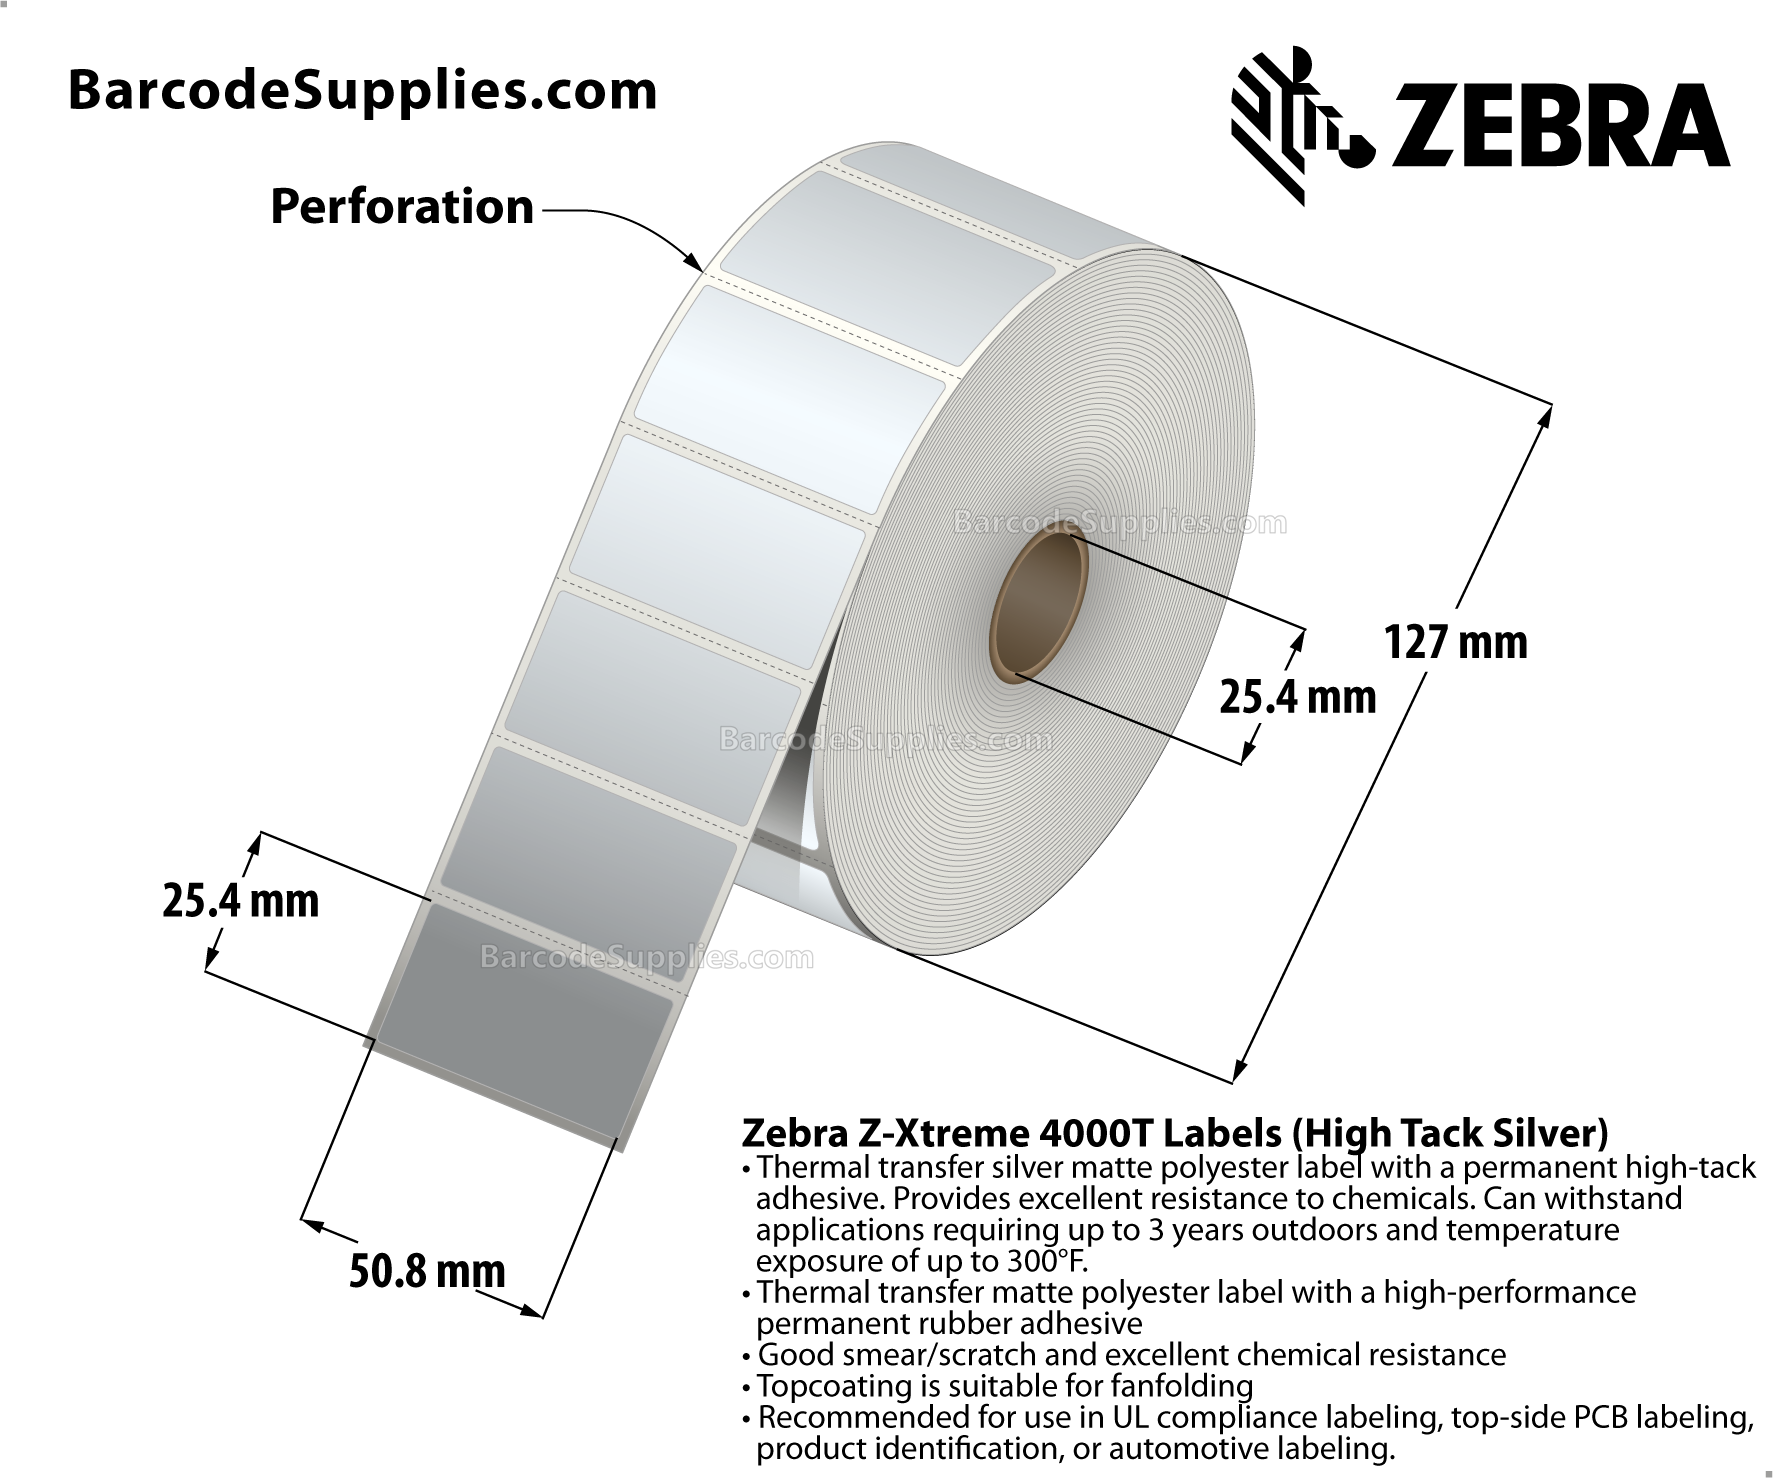 2 x 1 Thermal Transfer Silver Z-Xtreme 4000T High-Tack Silver Labels With High-tack Adhesive - Perforated - 1500 Labels Per Roll - Carton Of 1 Rolls - 1500 Labels Total - MPN: 10023174